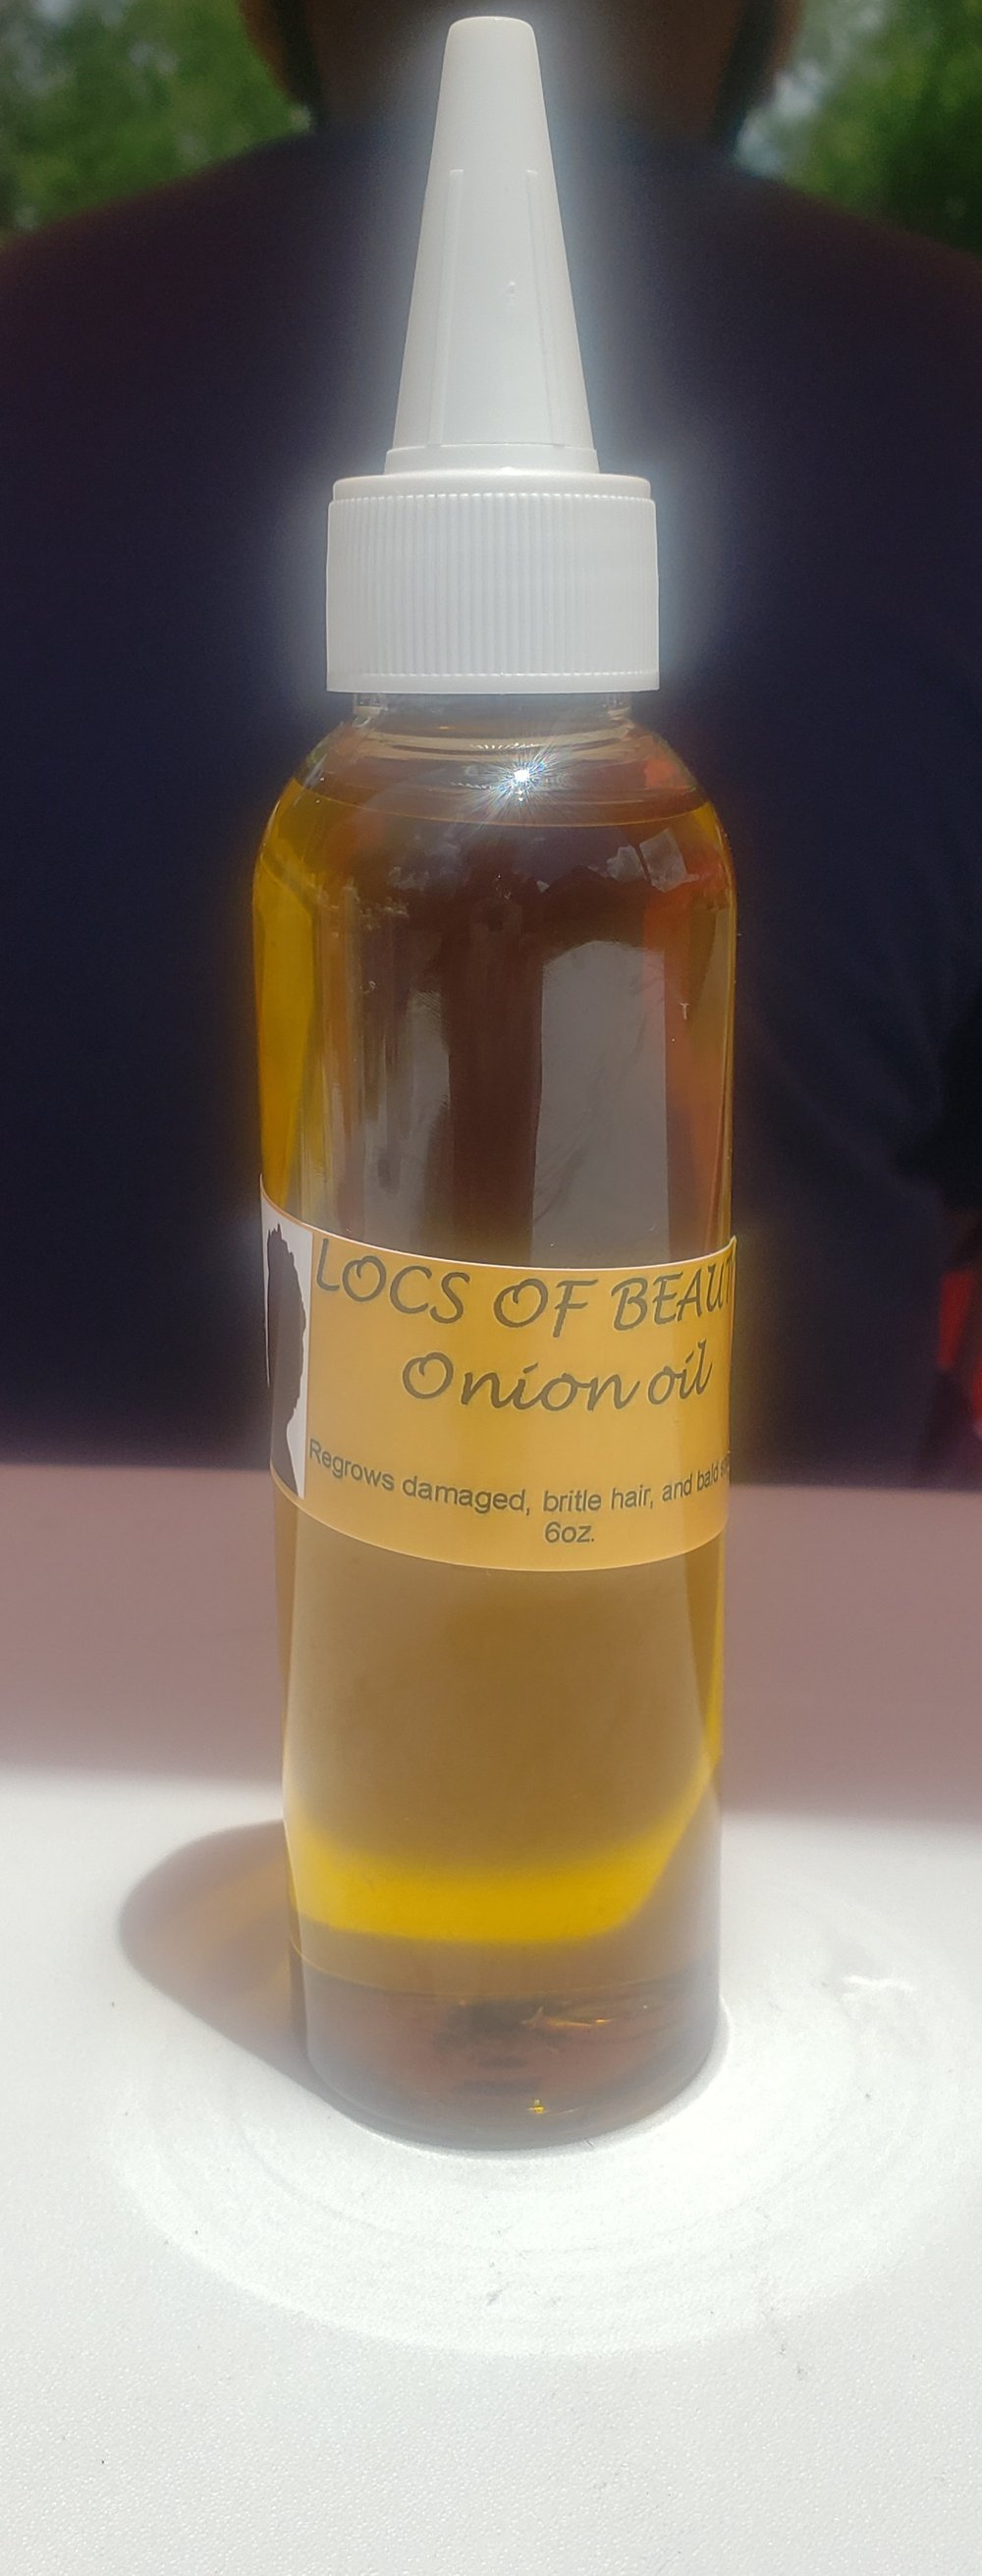 Image of Onion oil